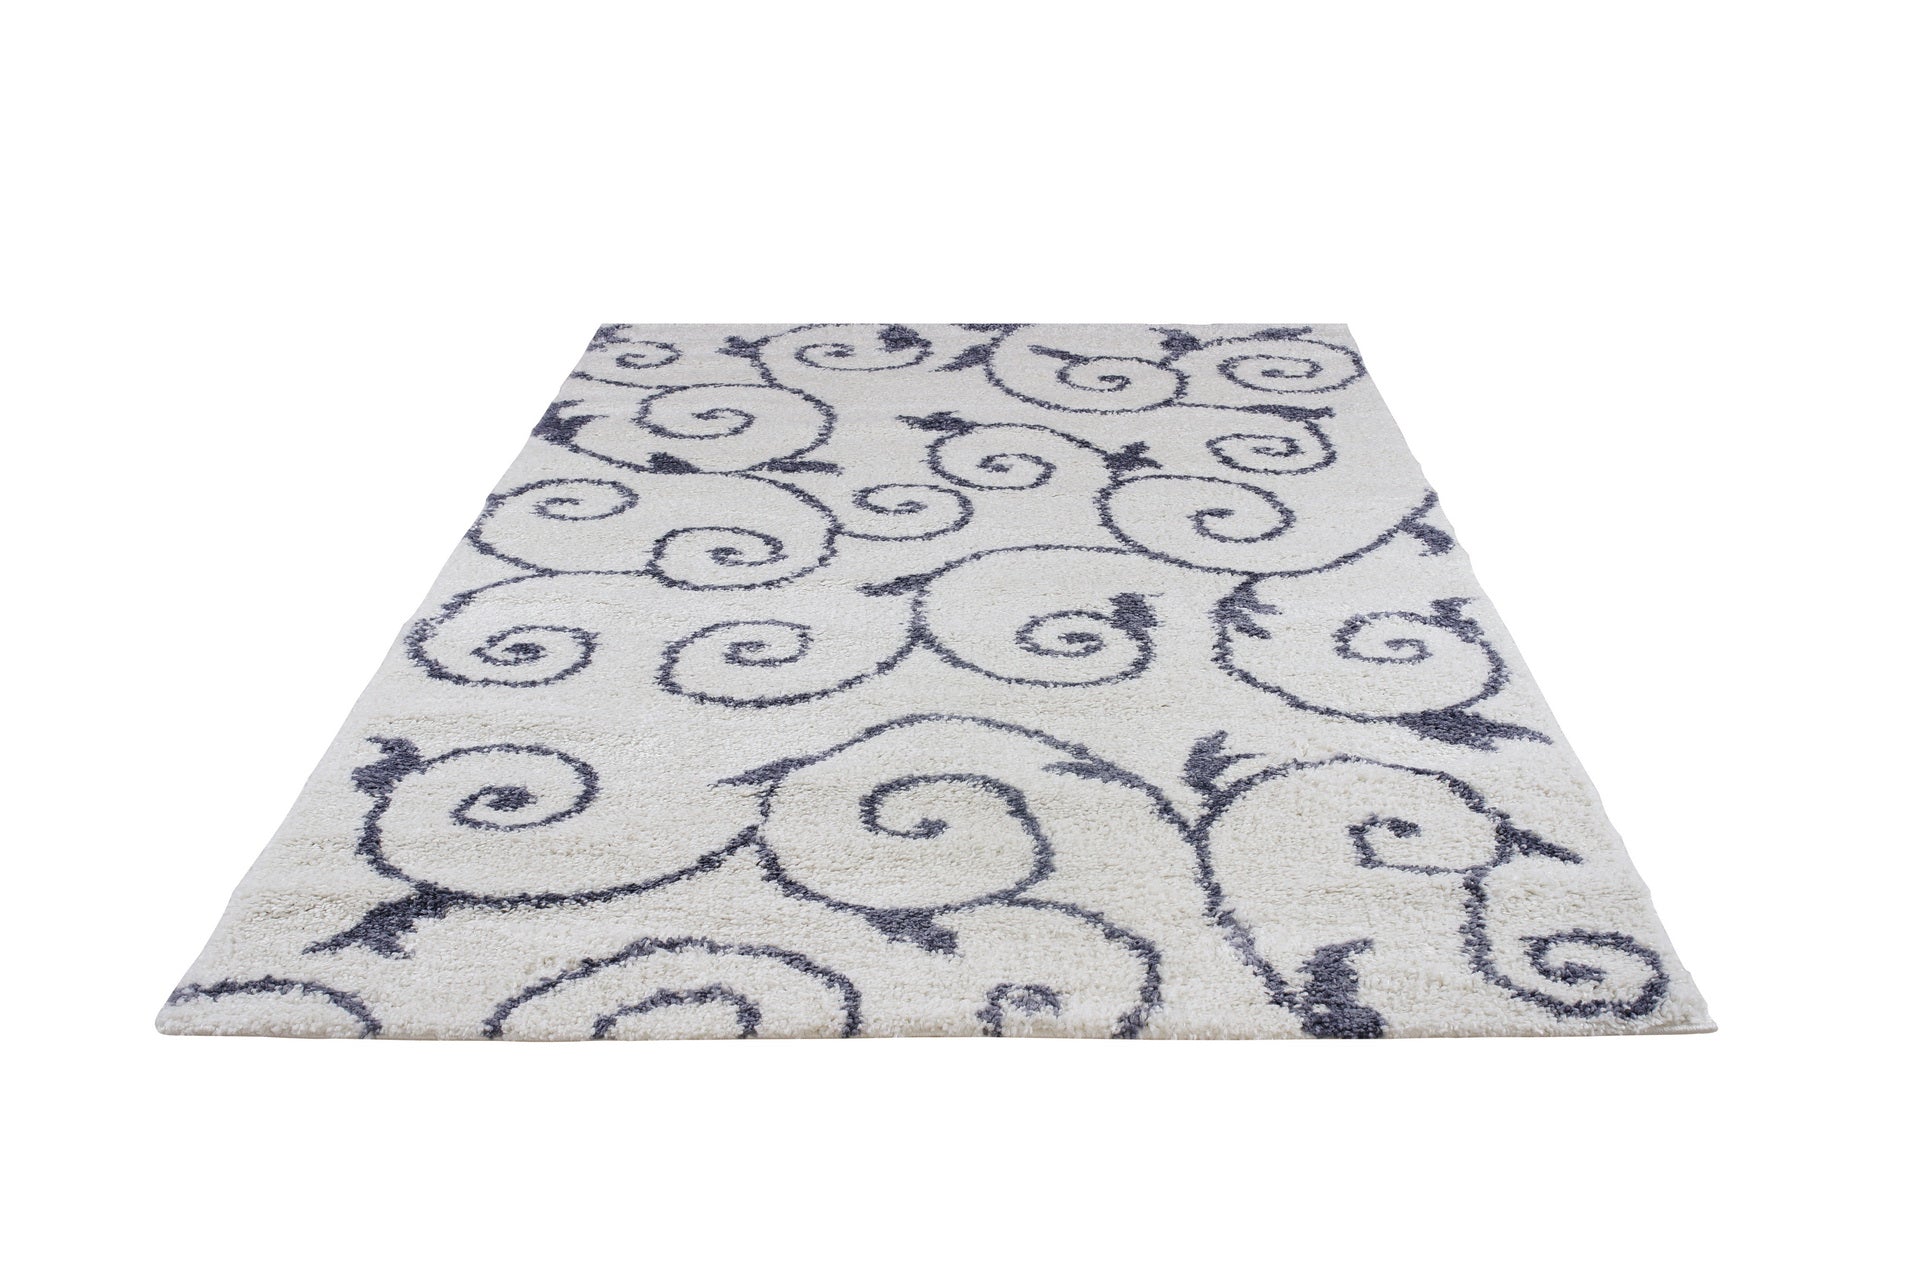 ladole rugs shaggy rabat abstract pattern sustainable spirals style indoor small mat doormat rug in white dark gray 110 x 211 57cm x 90cm 6x8, 6x9 ft Living Room, Bedroom, Dining Area, Kitchen Carpet